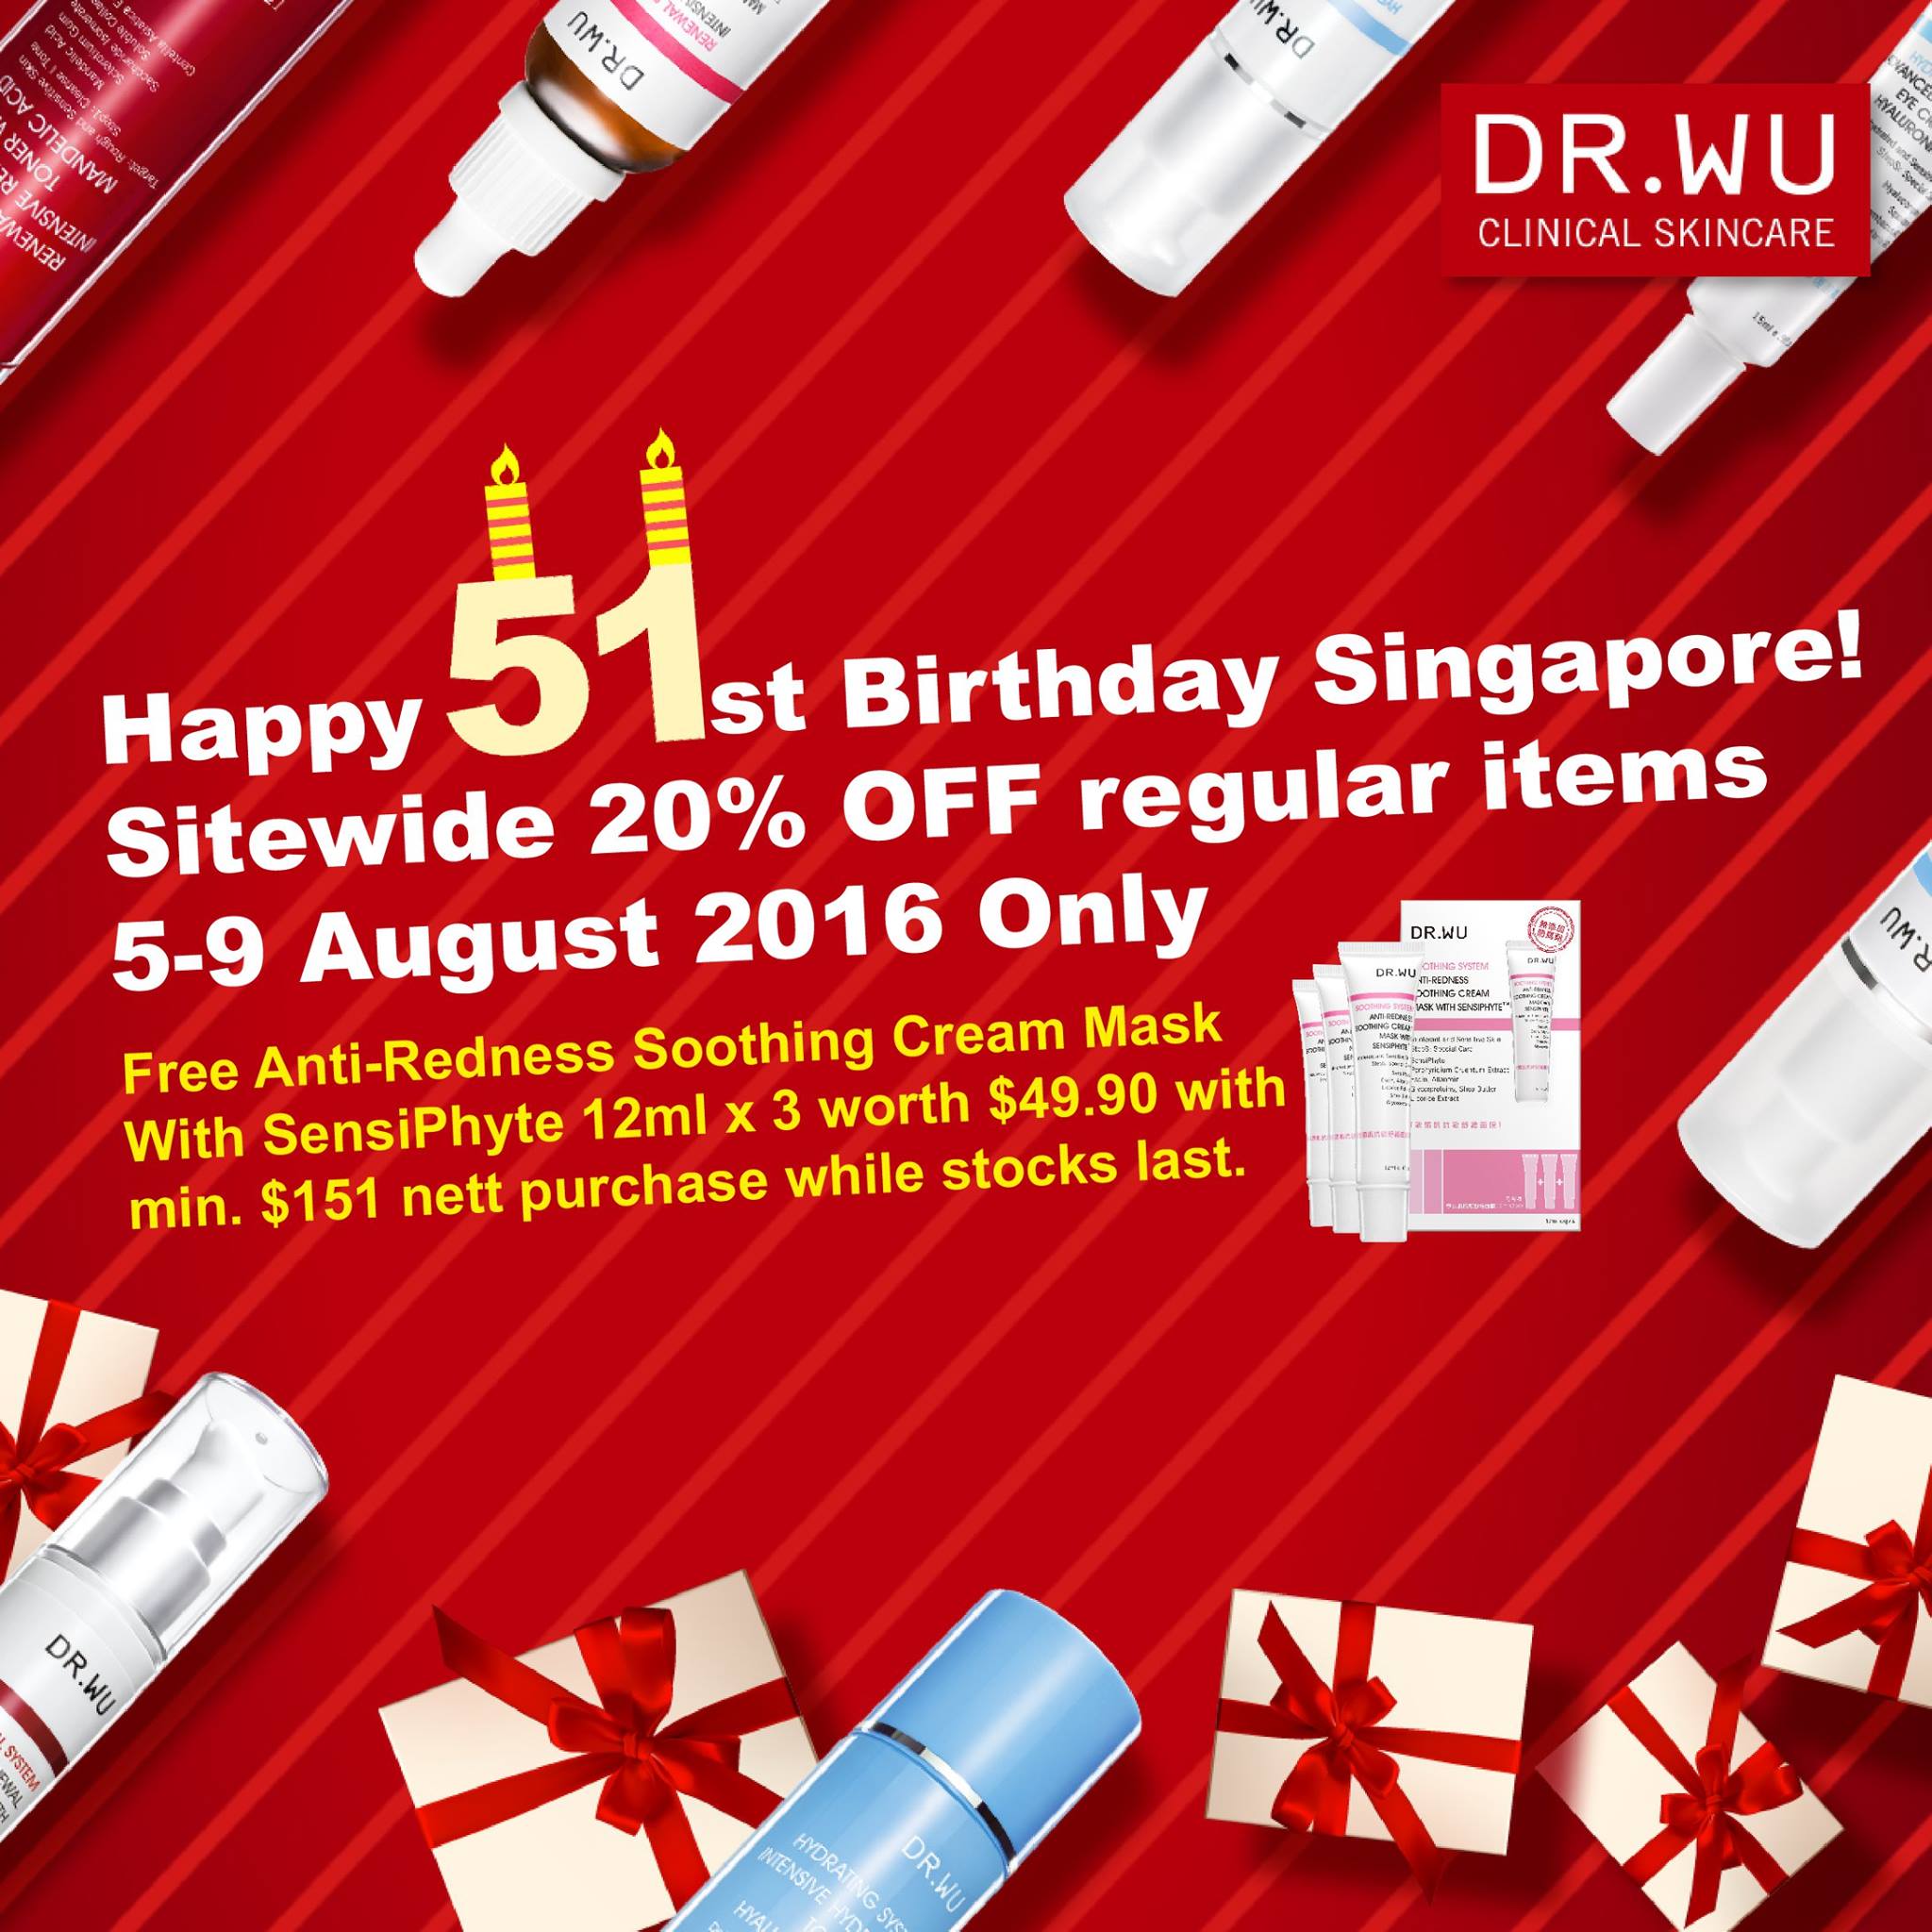 DR. WU Clinical Skincare National Day Singapore Promotion 5 to 9 Aug 2016